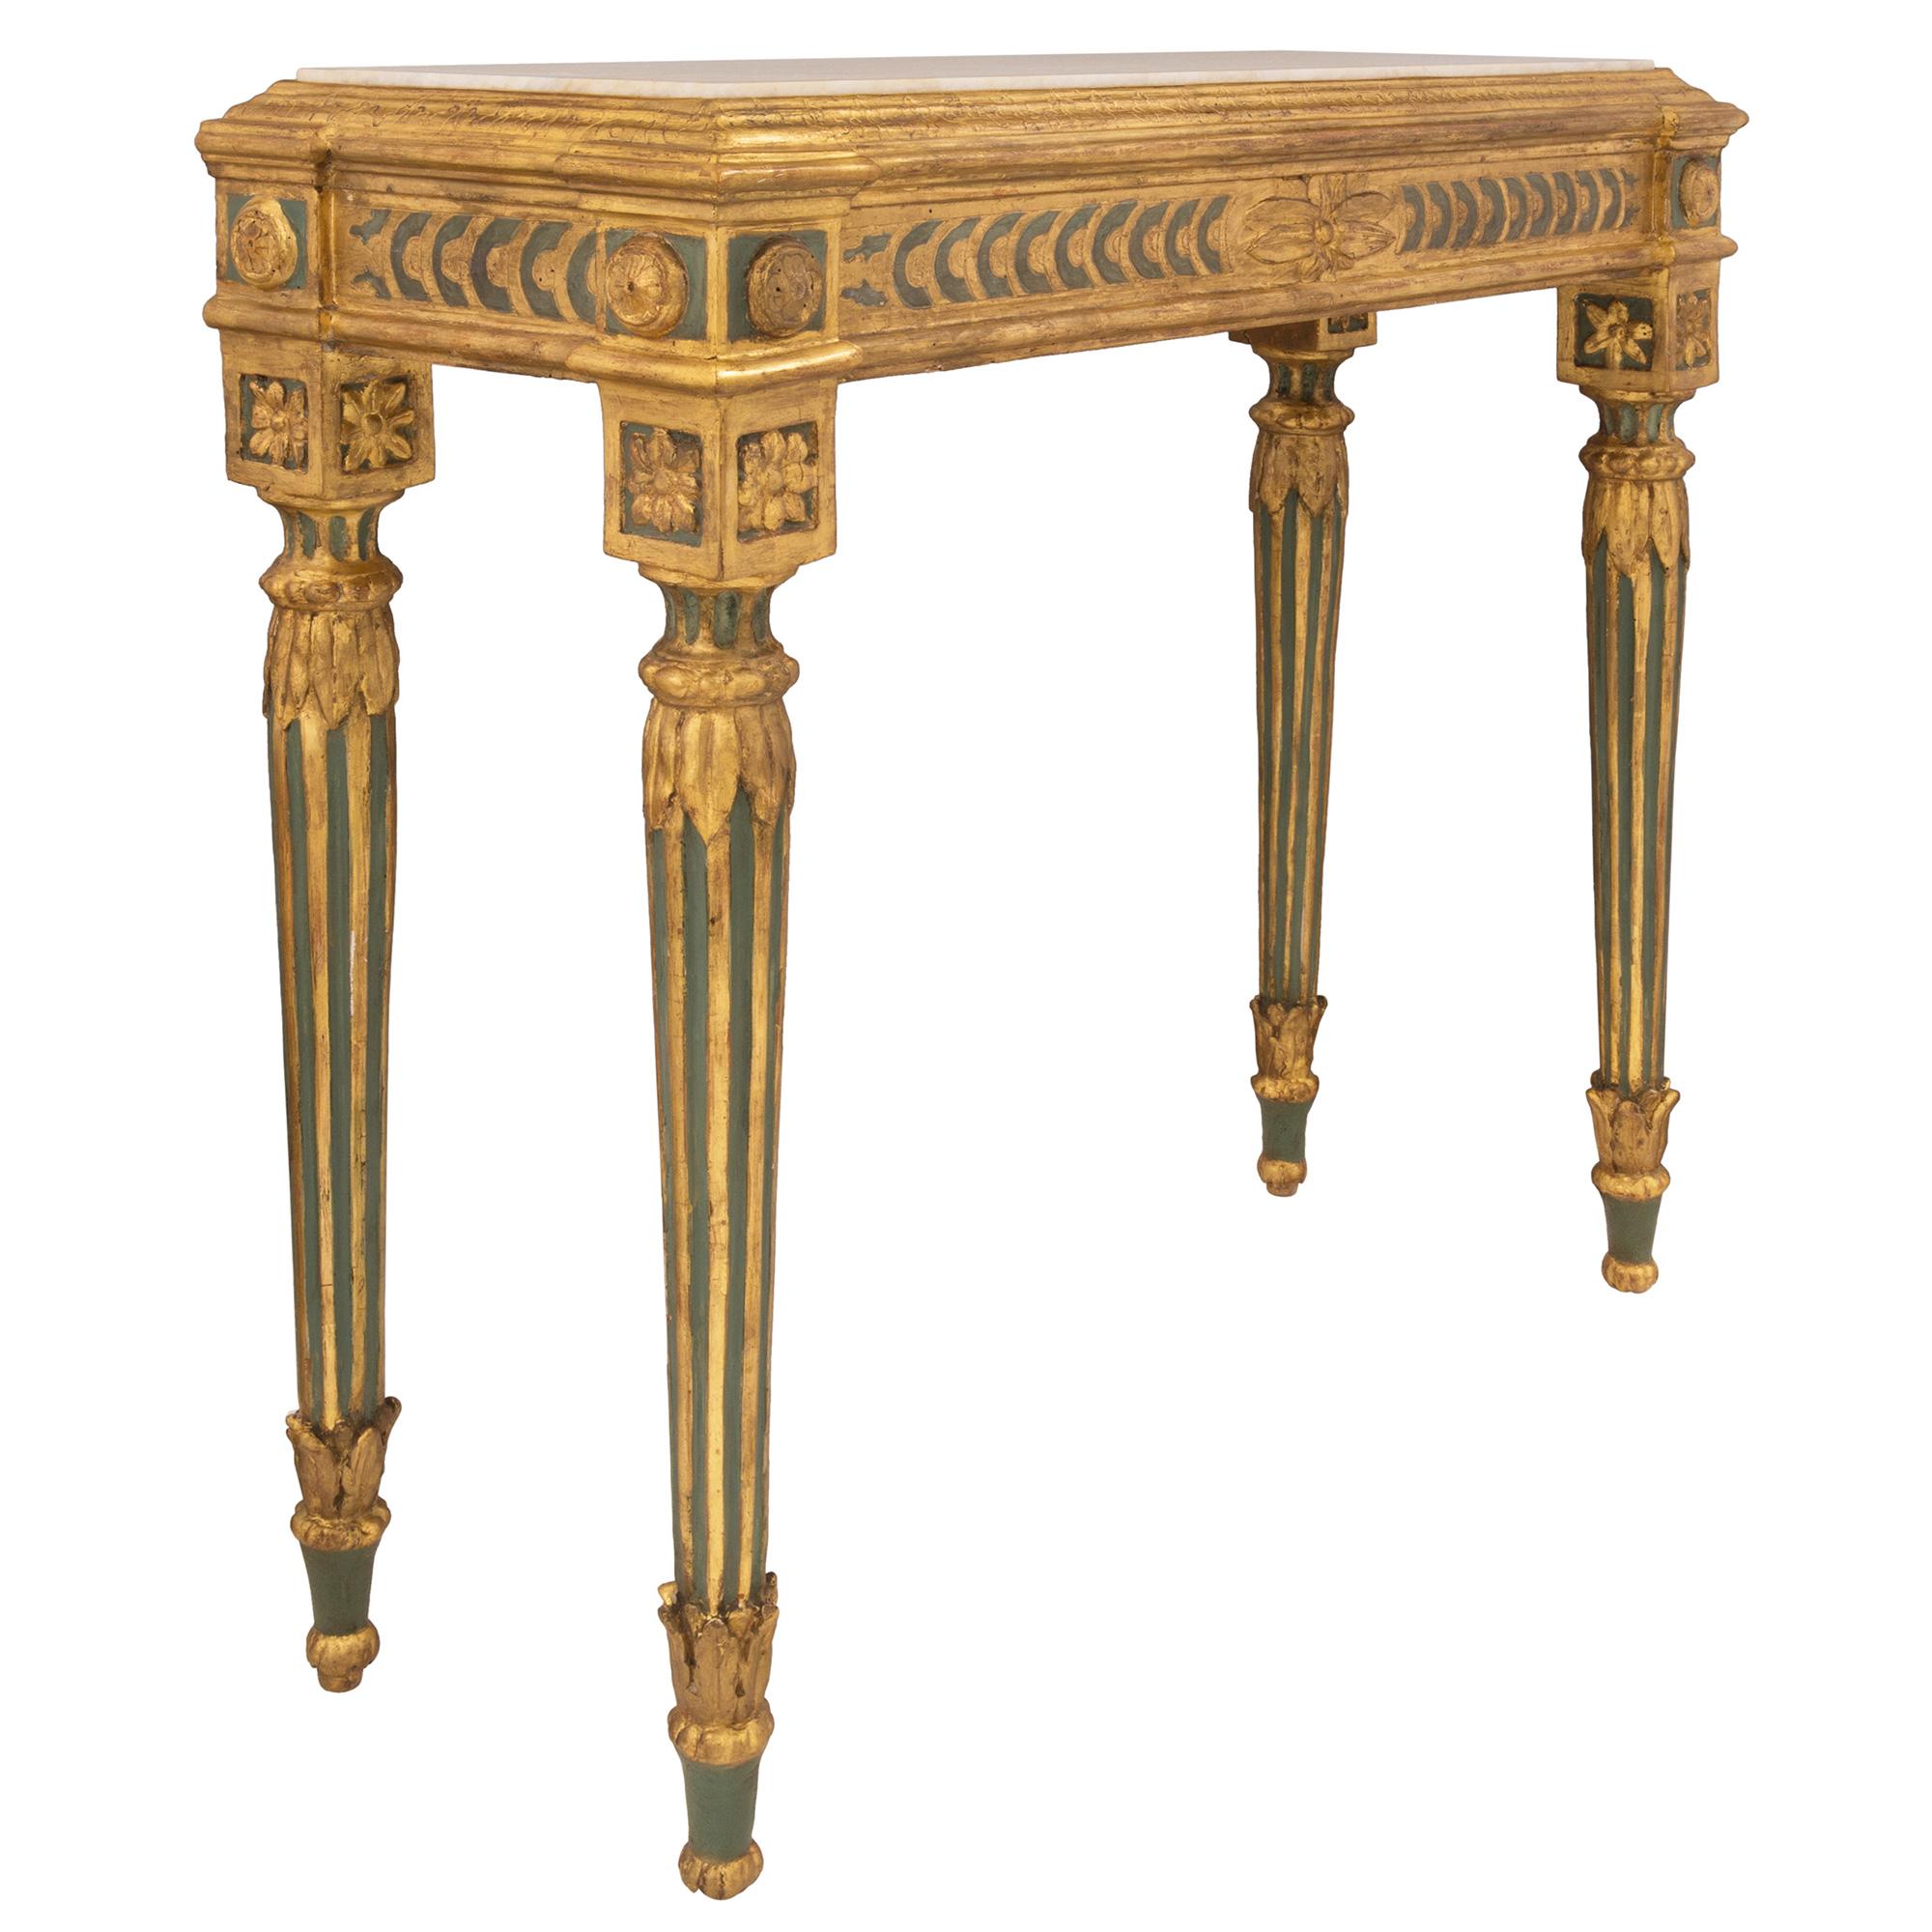 Patinated Pair of Italian 18th Century Louis XVI Period Freestanding Giltwood Consoles For Sale